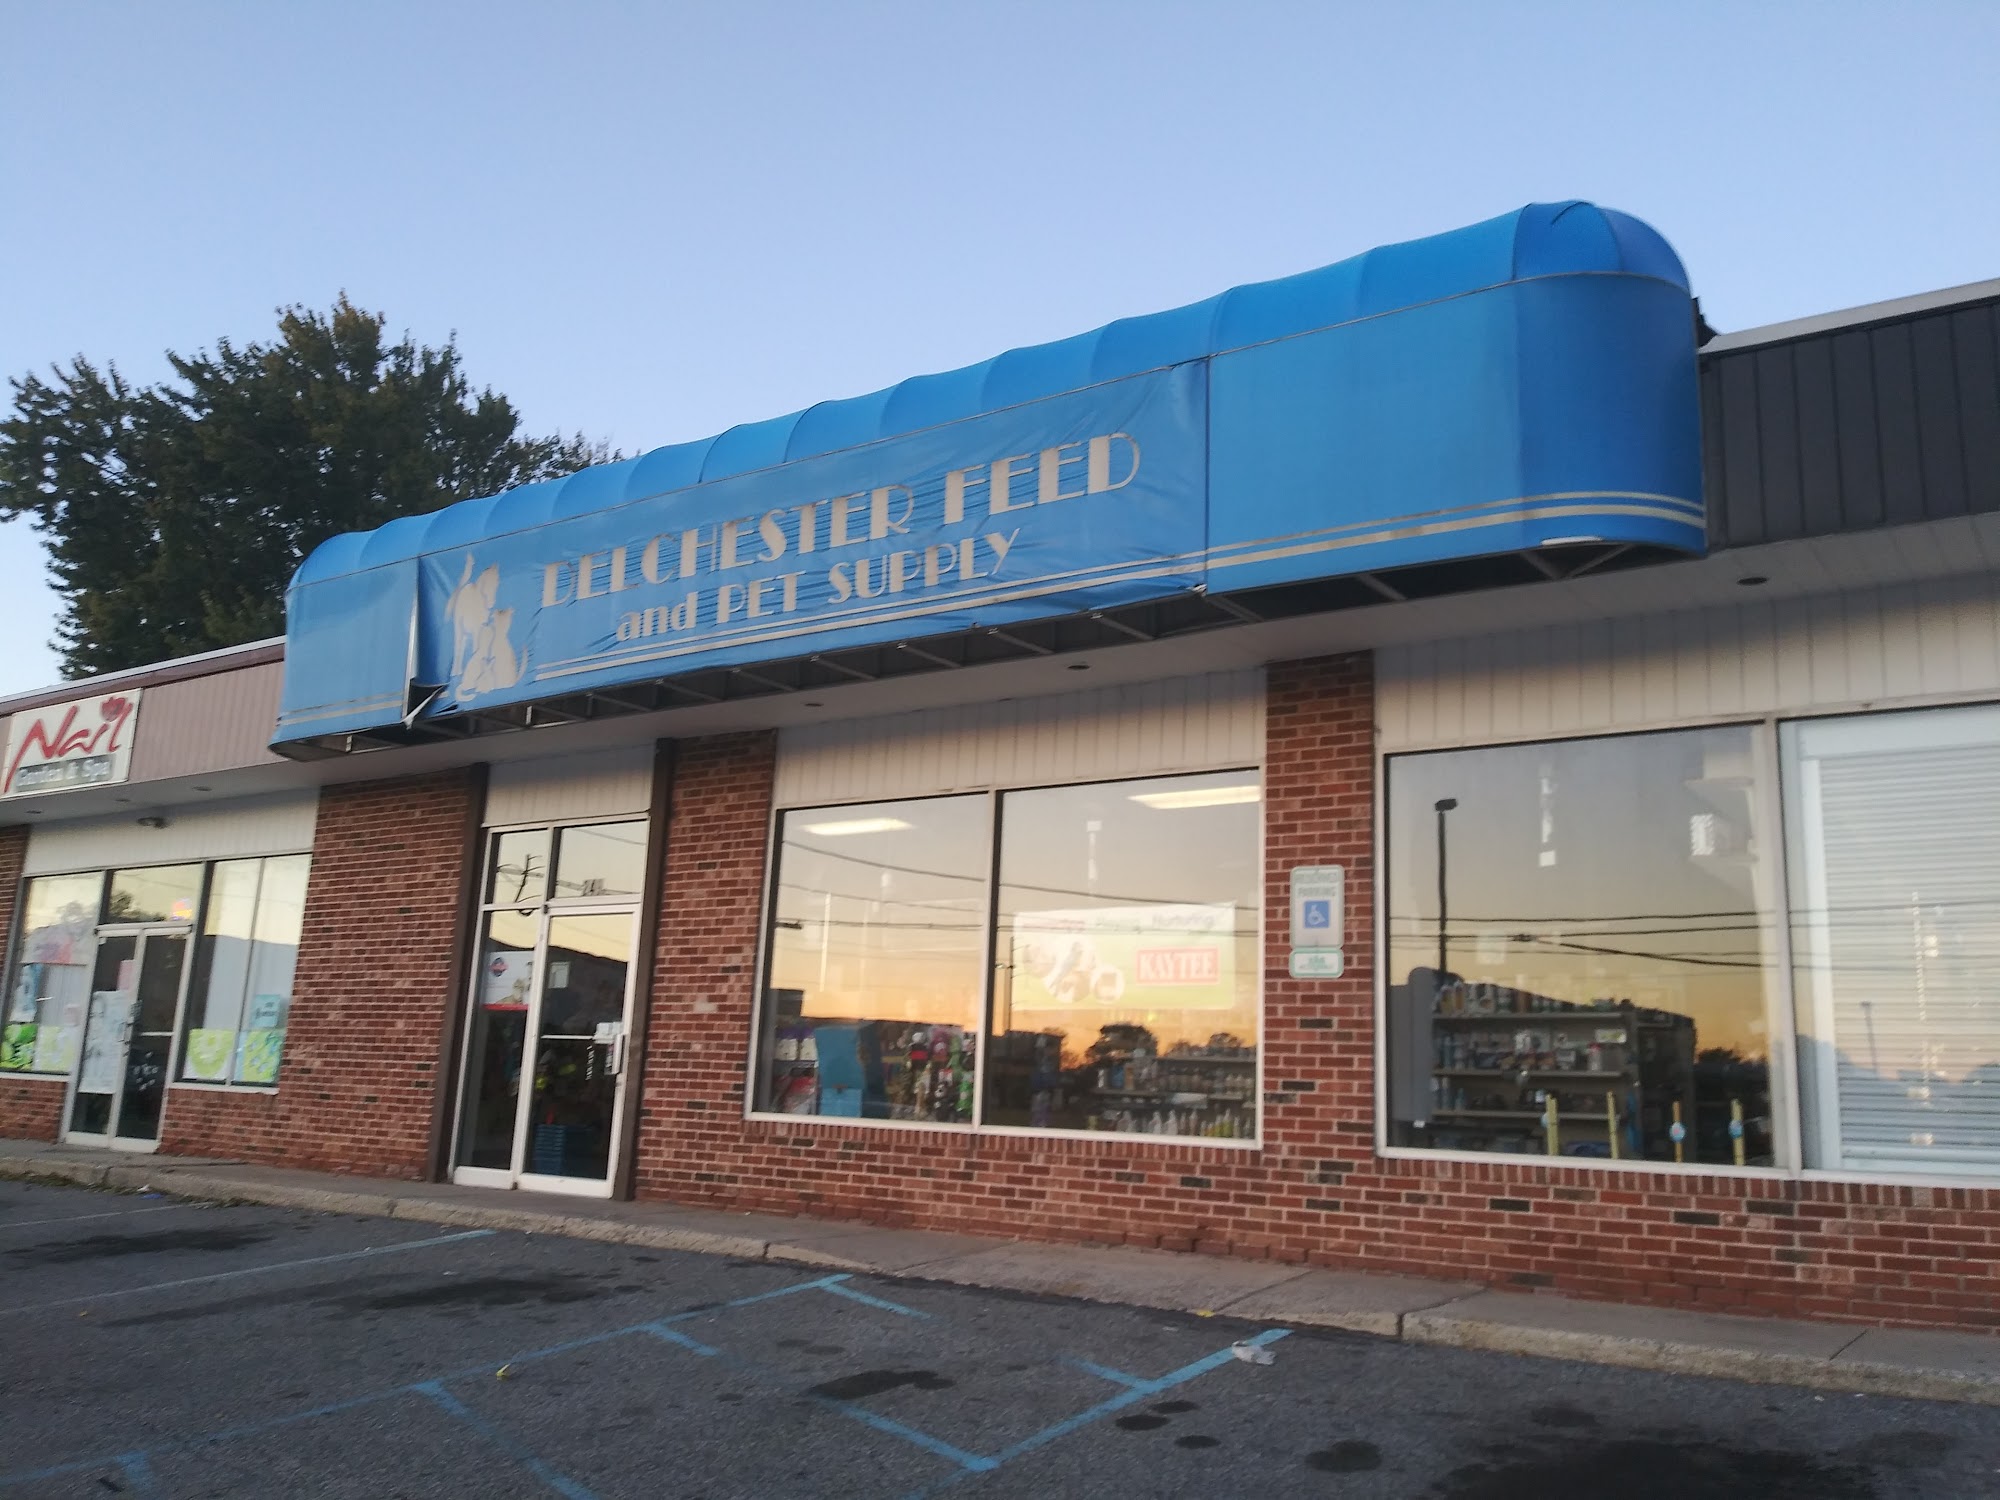 Delchester Feed & Pet Supply